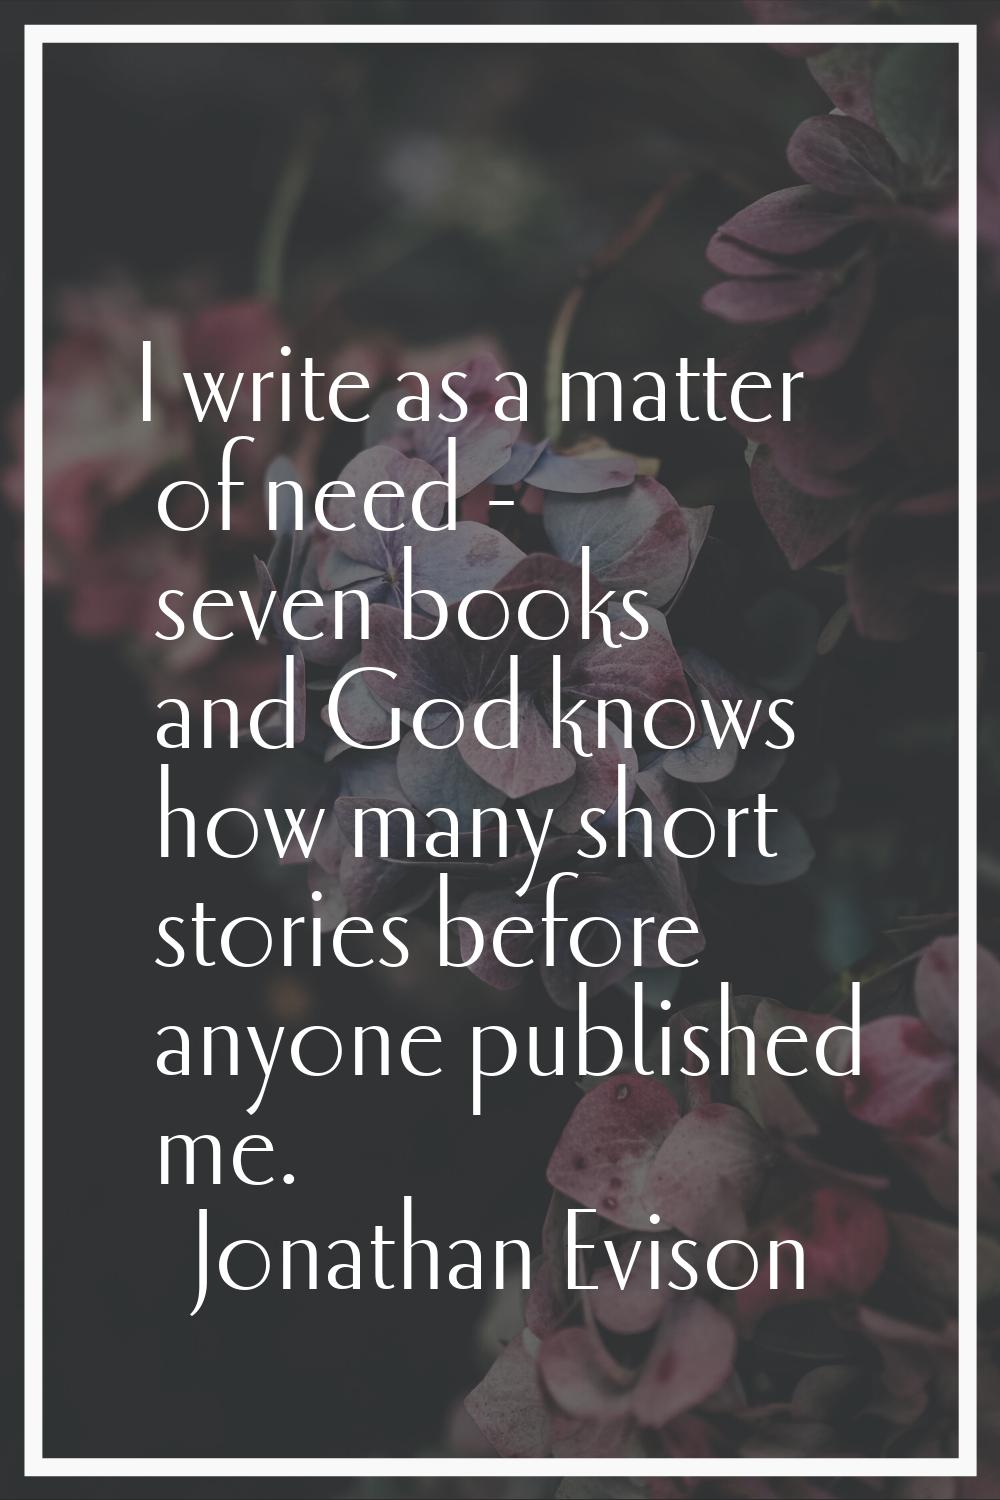 I write as a matter of need - seven books and God knows how many short stories before anyone publis